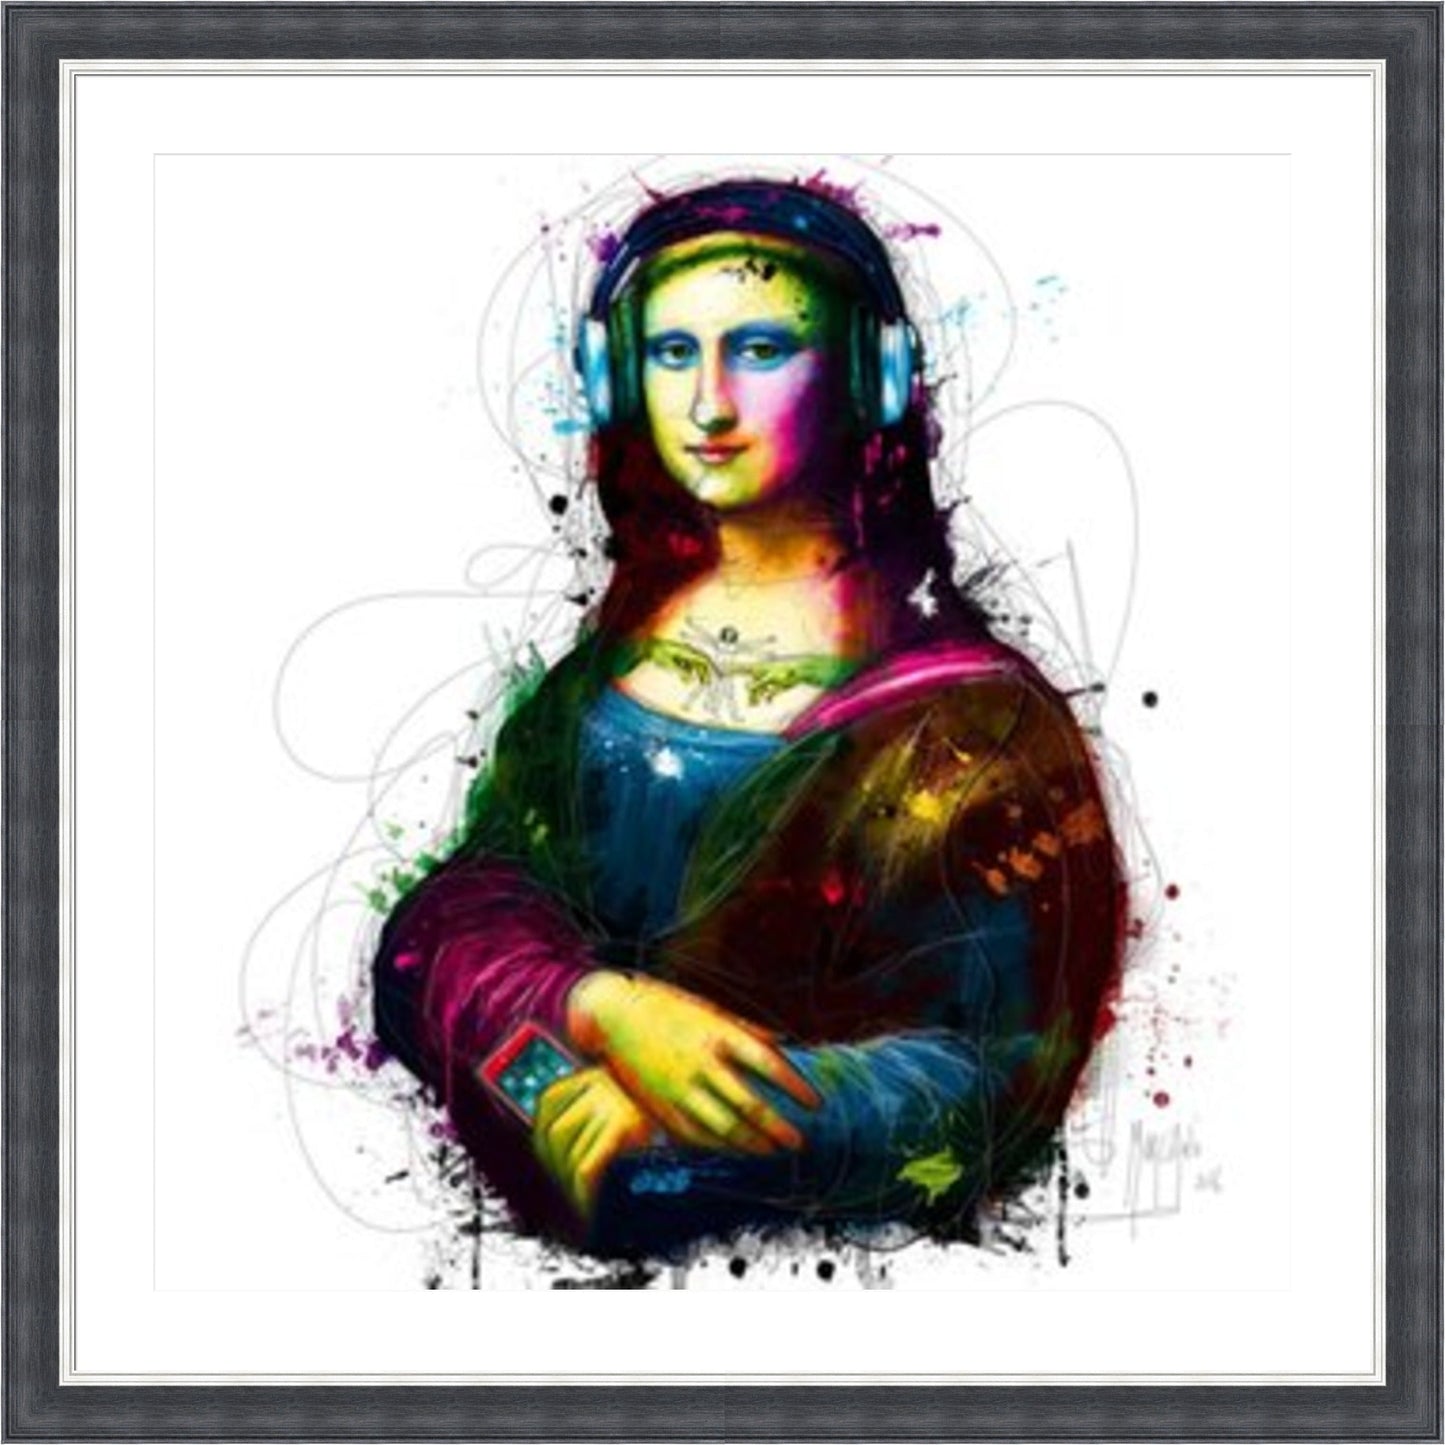 Mona Lisa's Song by Patrice Murciano